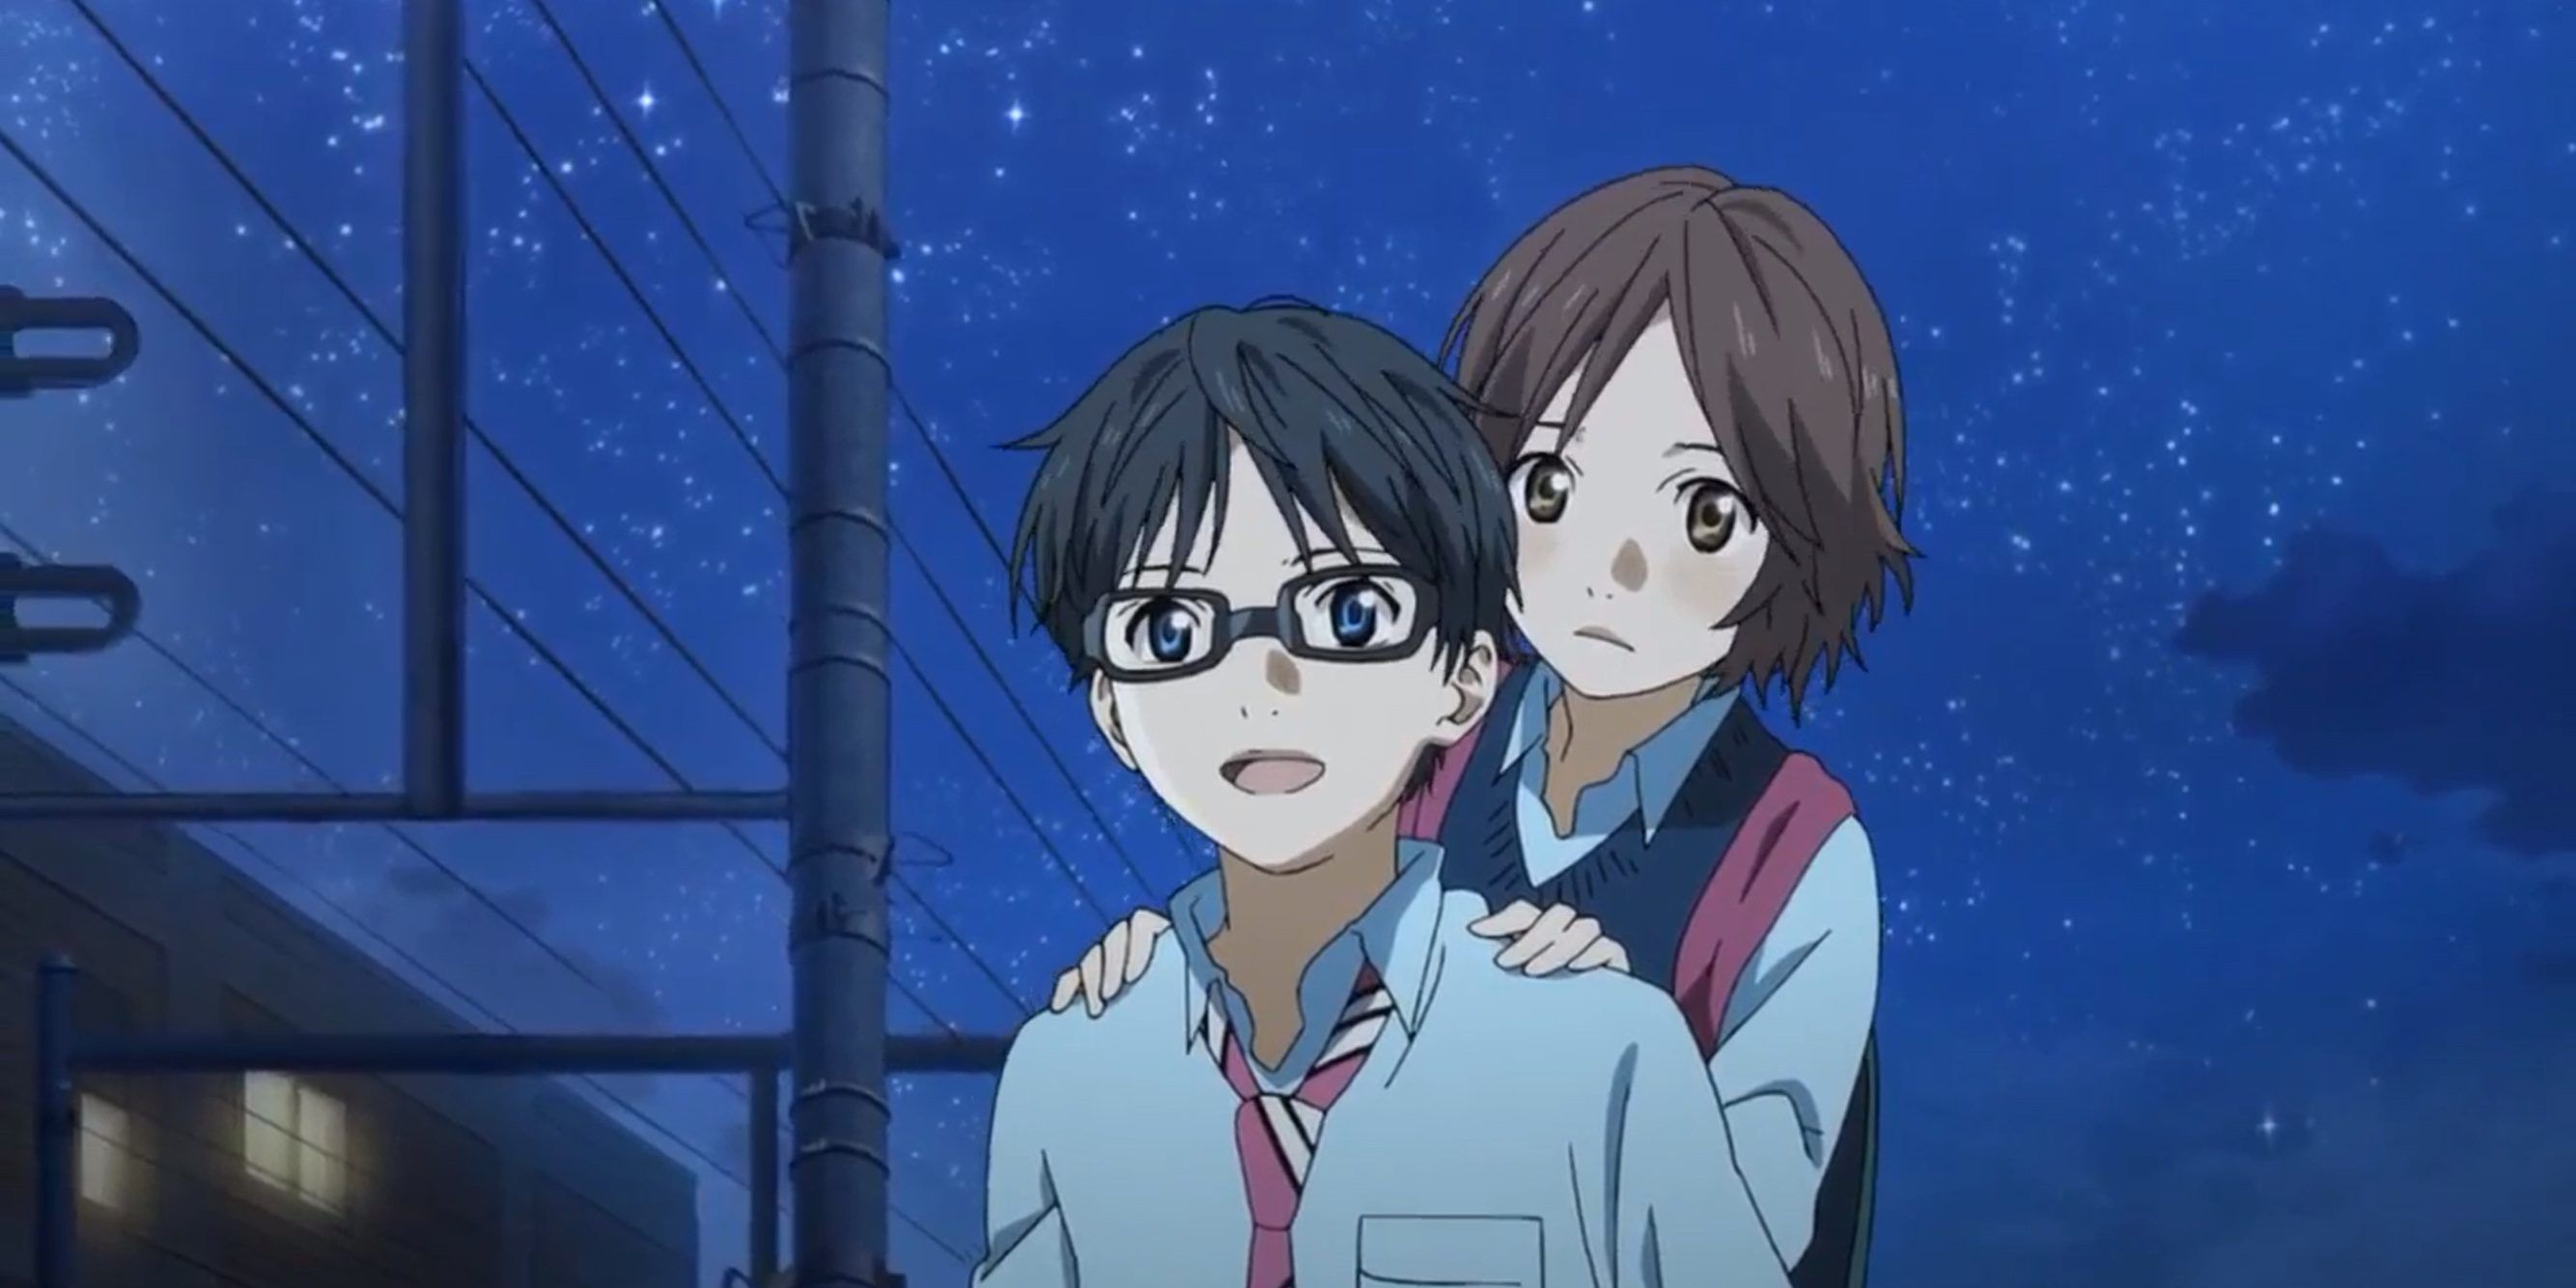 Your Lie in April: Do Kousei and Tsubaki Get Together?